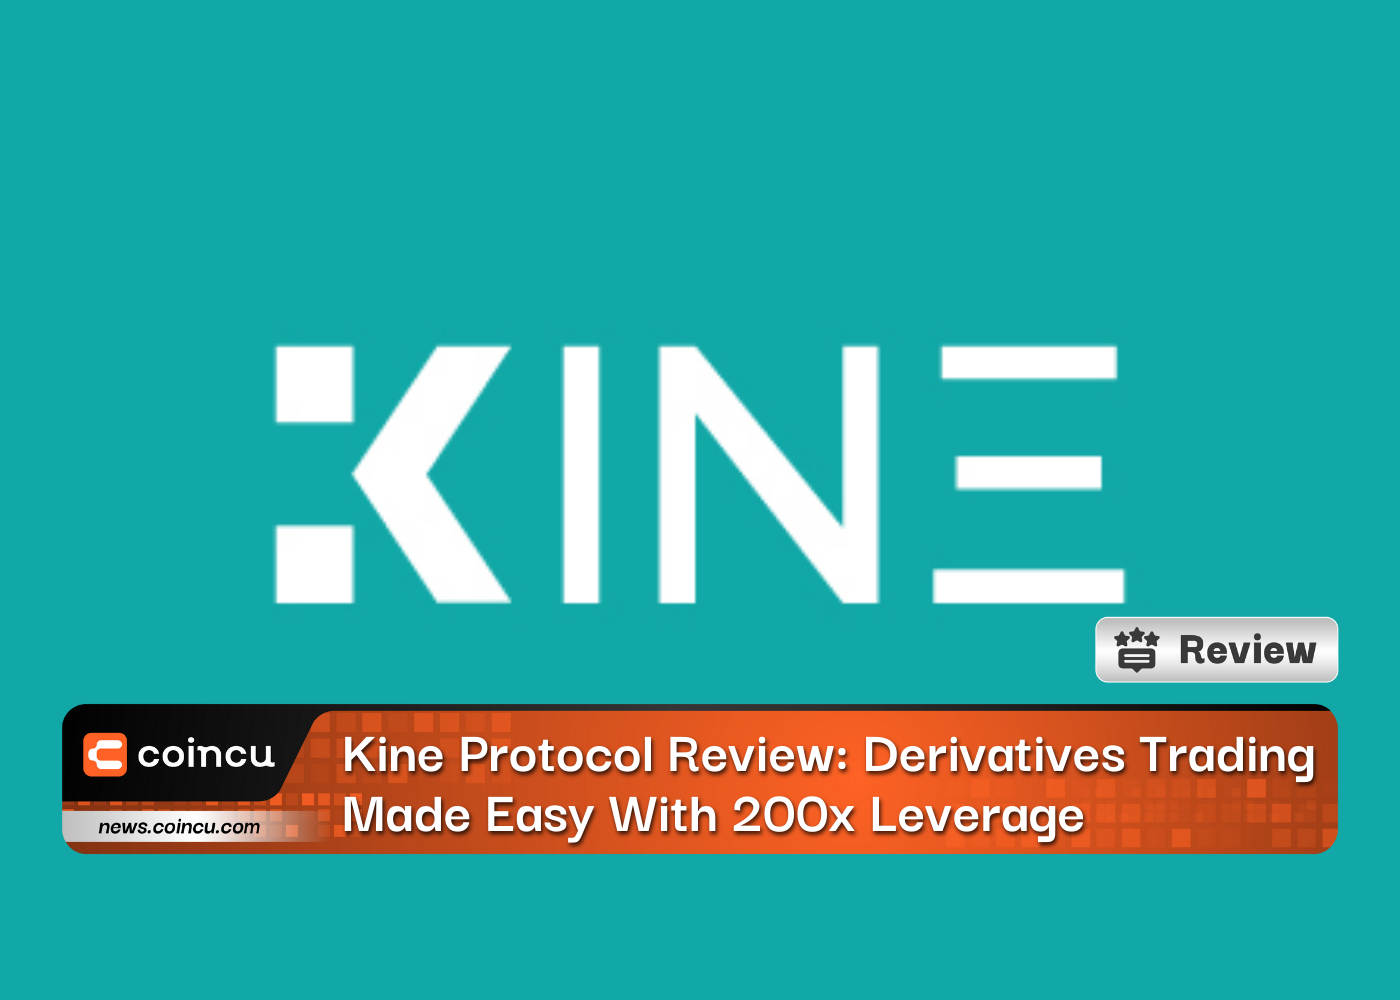 Kine Protocol Review: Derivatives Trading Made Easy With 200x Leverage